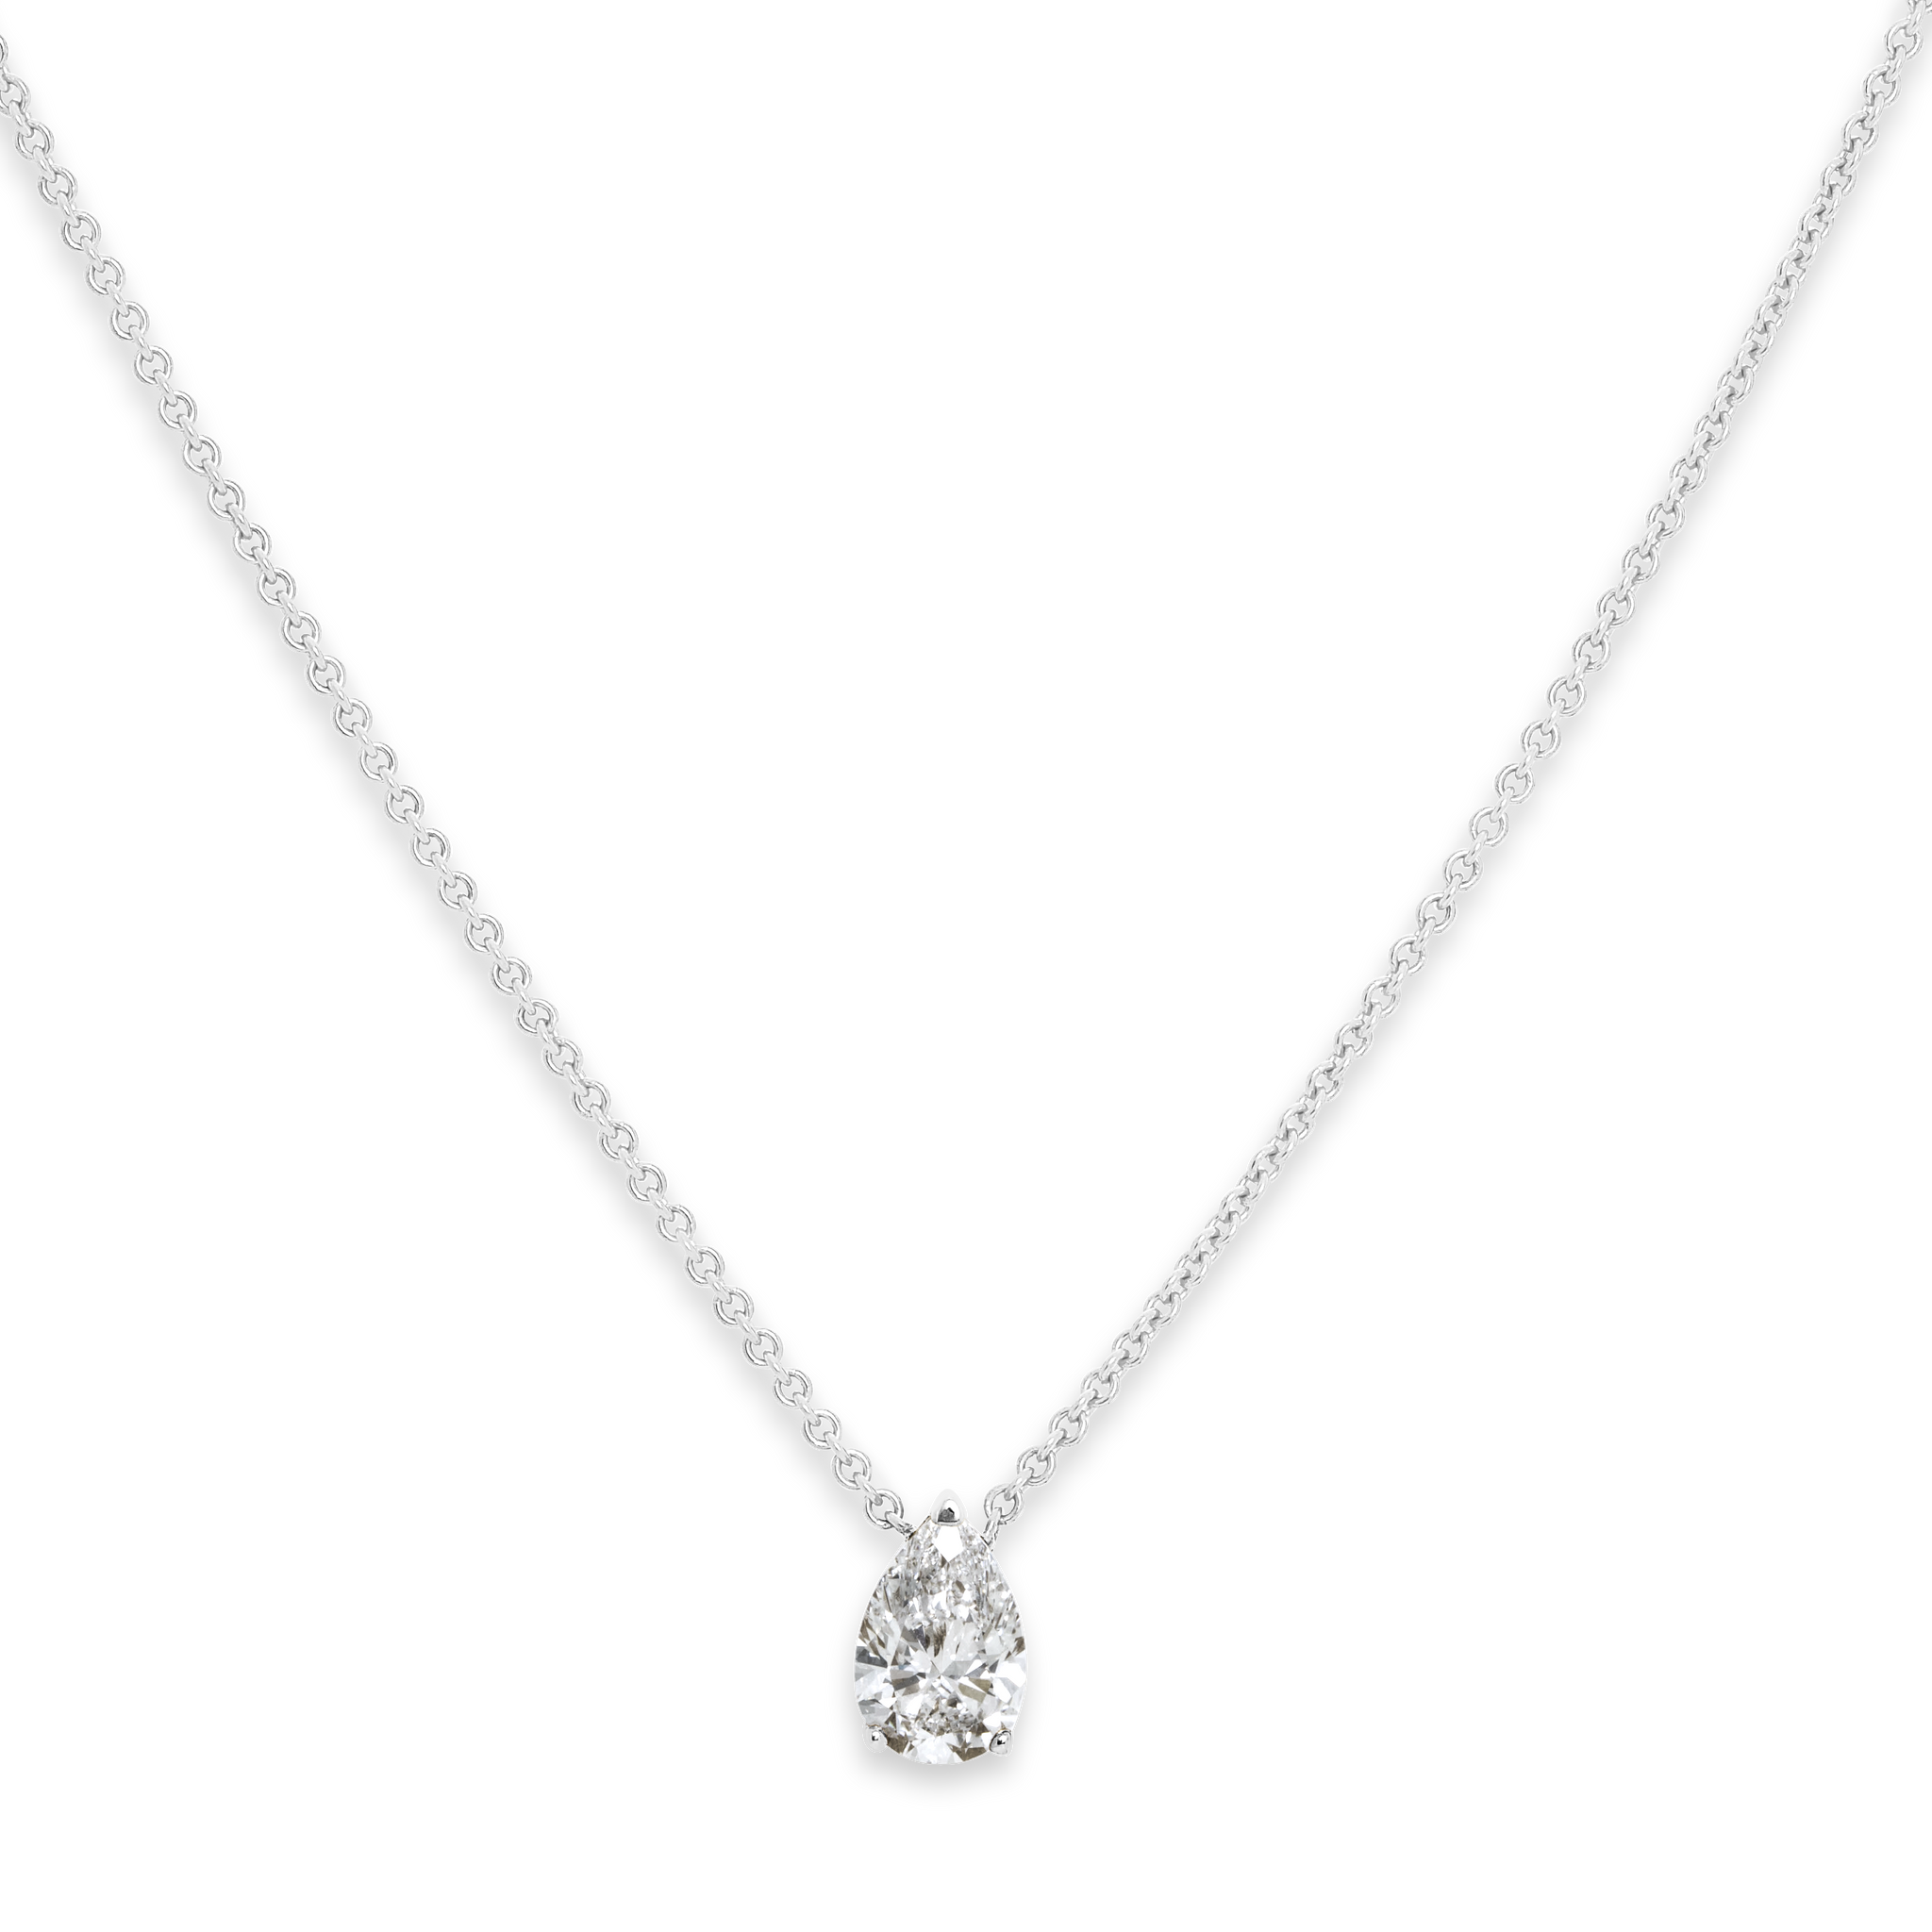 The ultimate timeless necklace. A solitaire pear is centered between the collarbone on an 18k gold chain. The length of this necklace is 16" (40cm). Please get in touch if you would like a different chain length. Shape, color, and size of this pear diamond necklace are fully customizable as well.